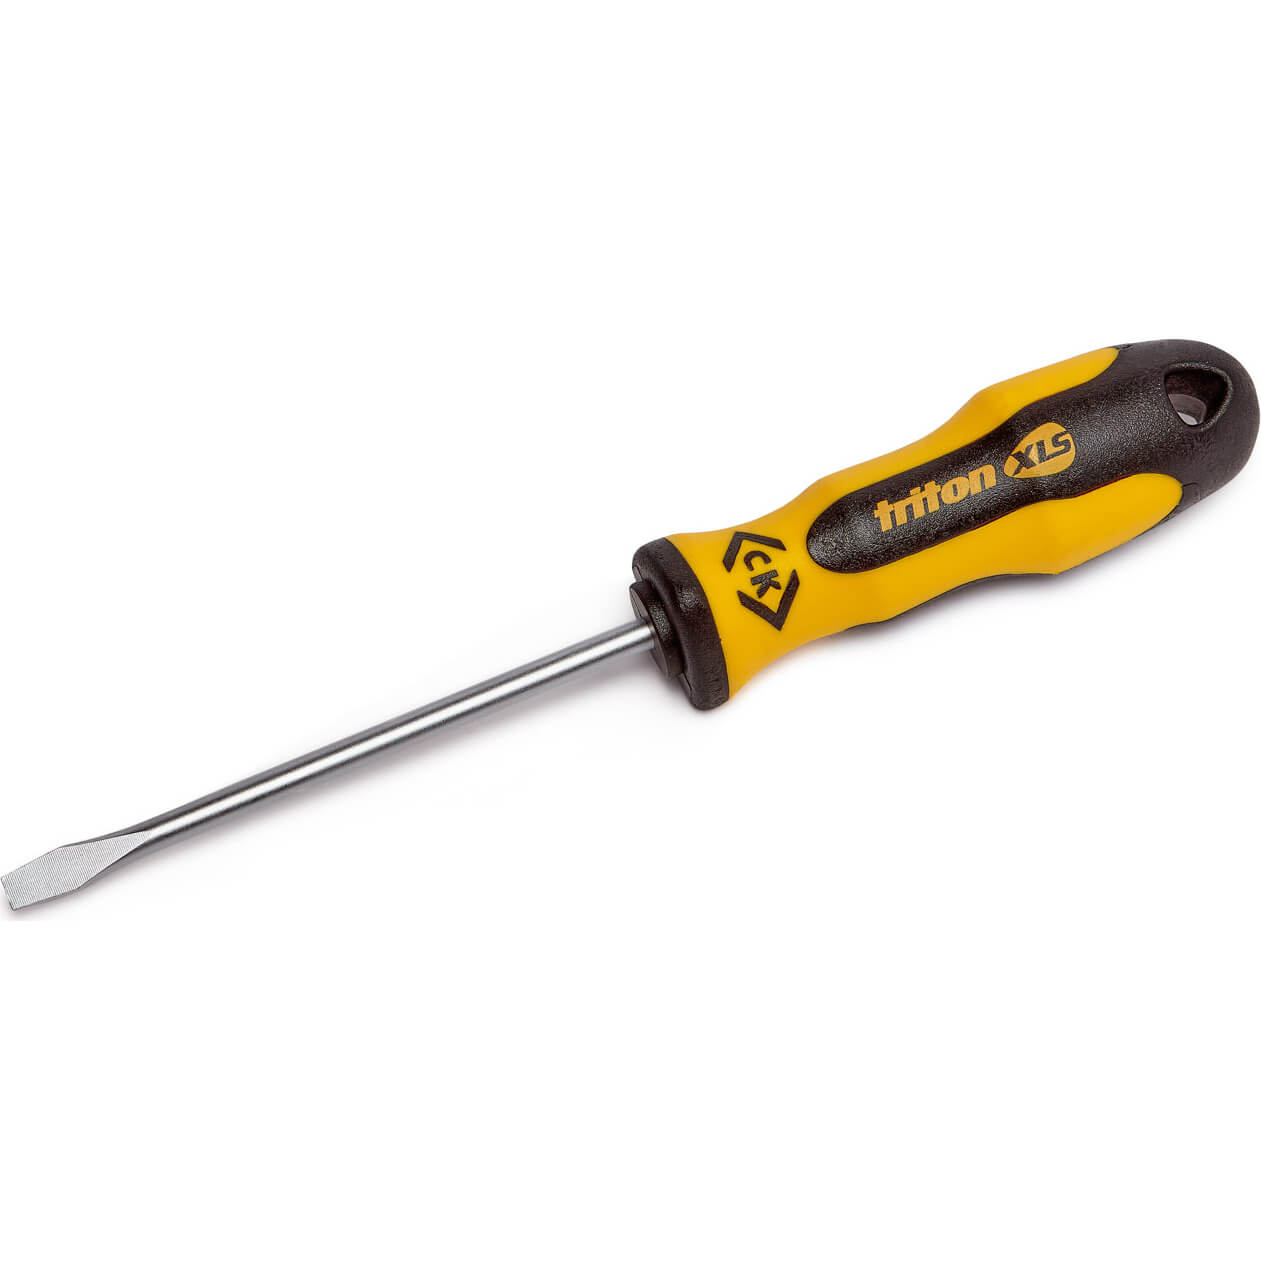 Image of CK Triton XLS Flared Slotted Screwdriver 6.5mm 150mm